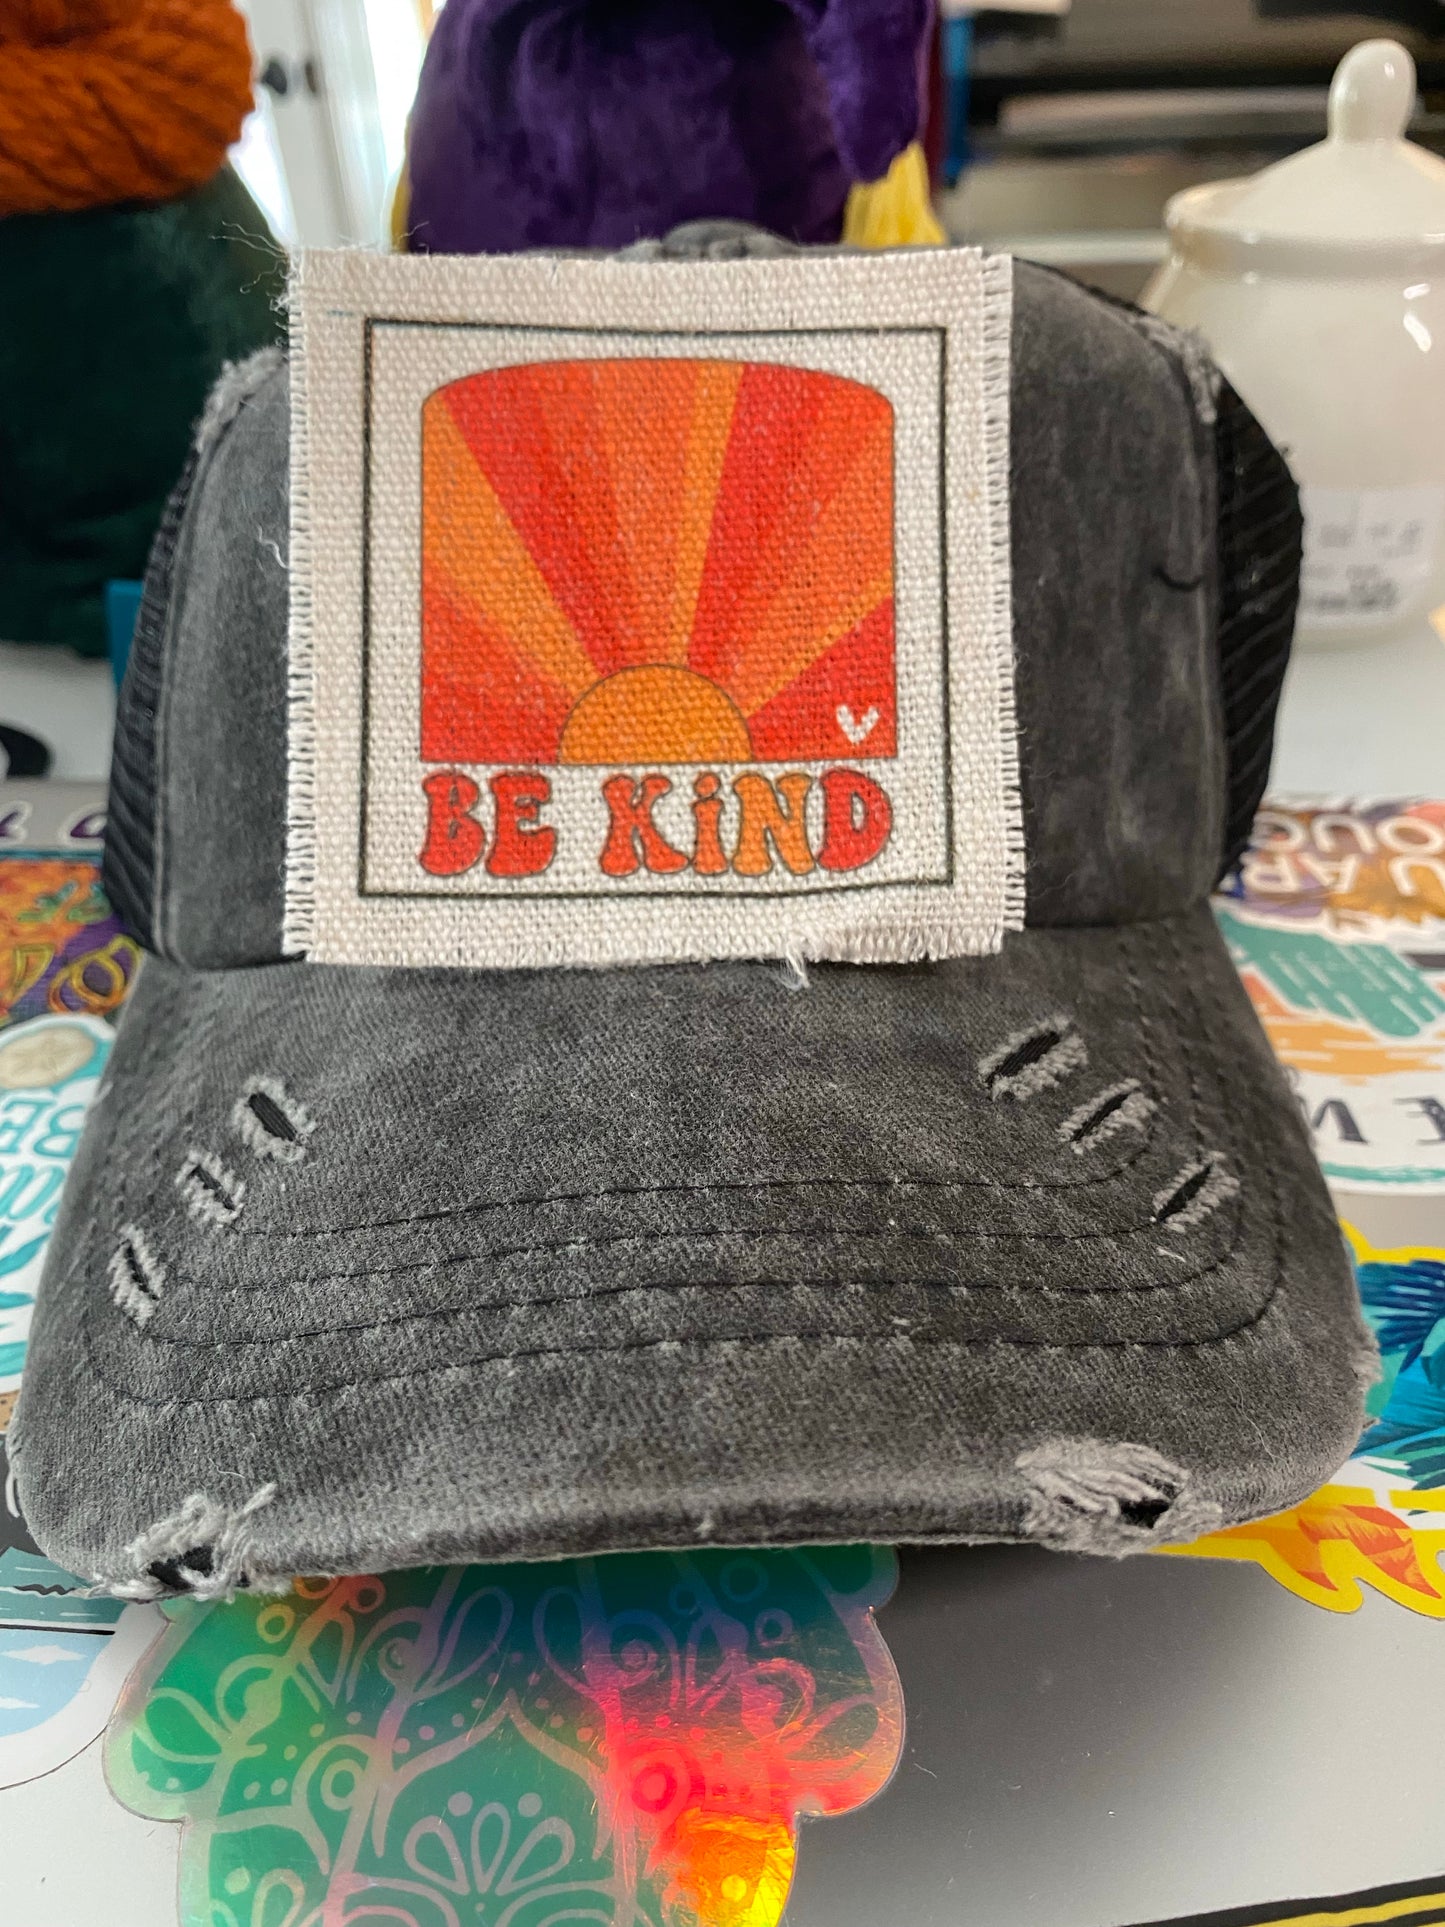 Be Kind with small heart Hat Patch